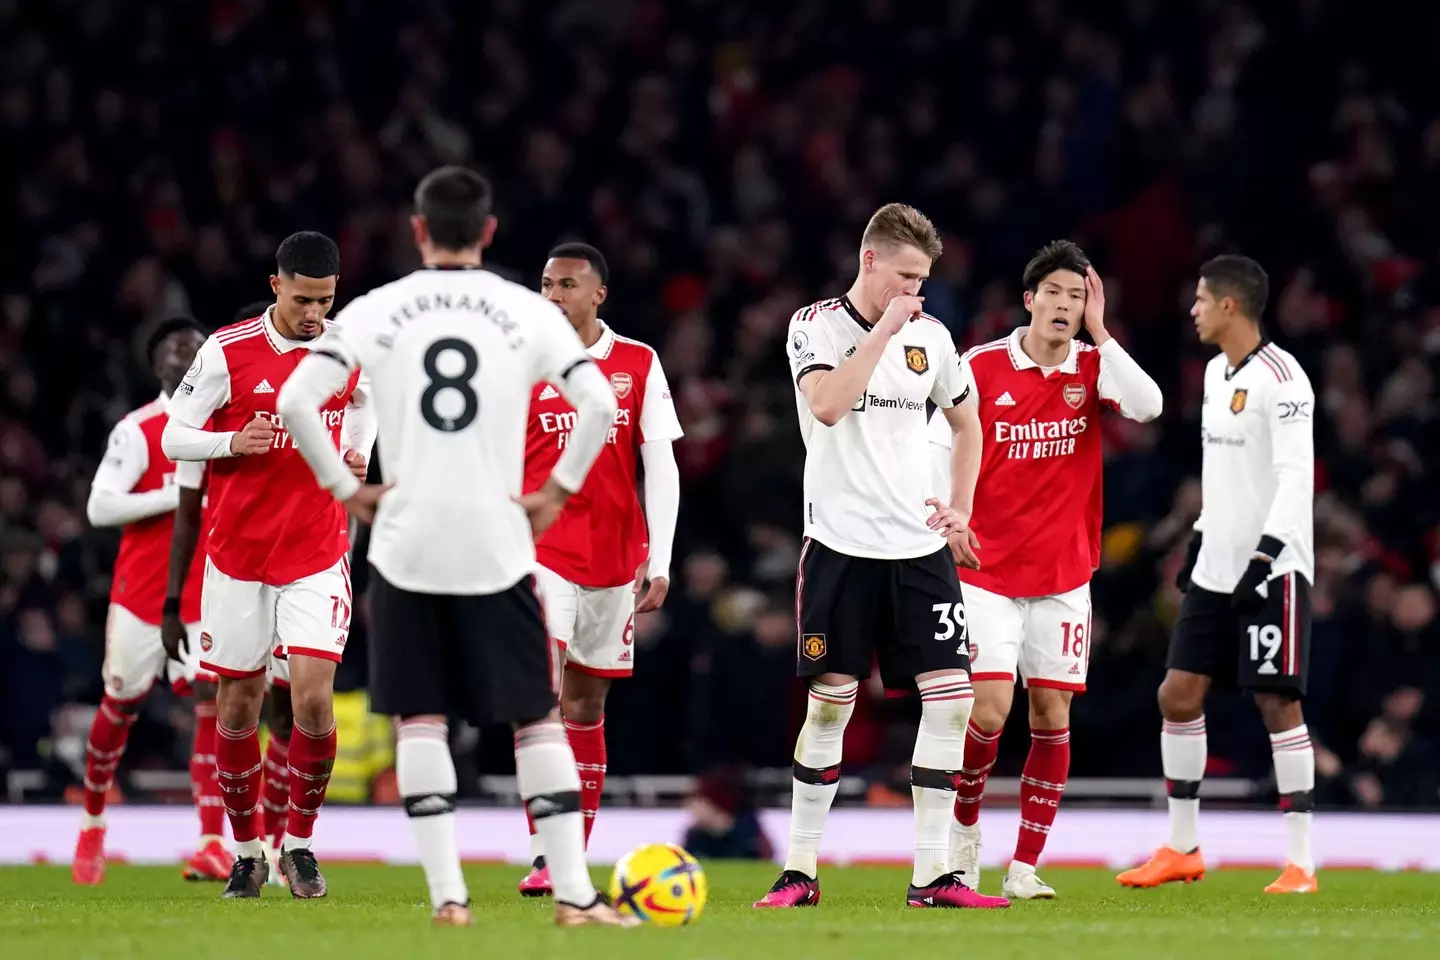 McTominay was criticised after the loss to Arsenal. Image: Alamy